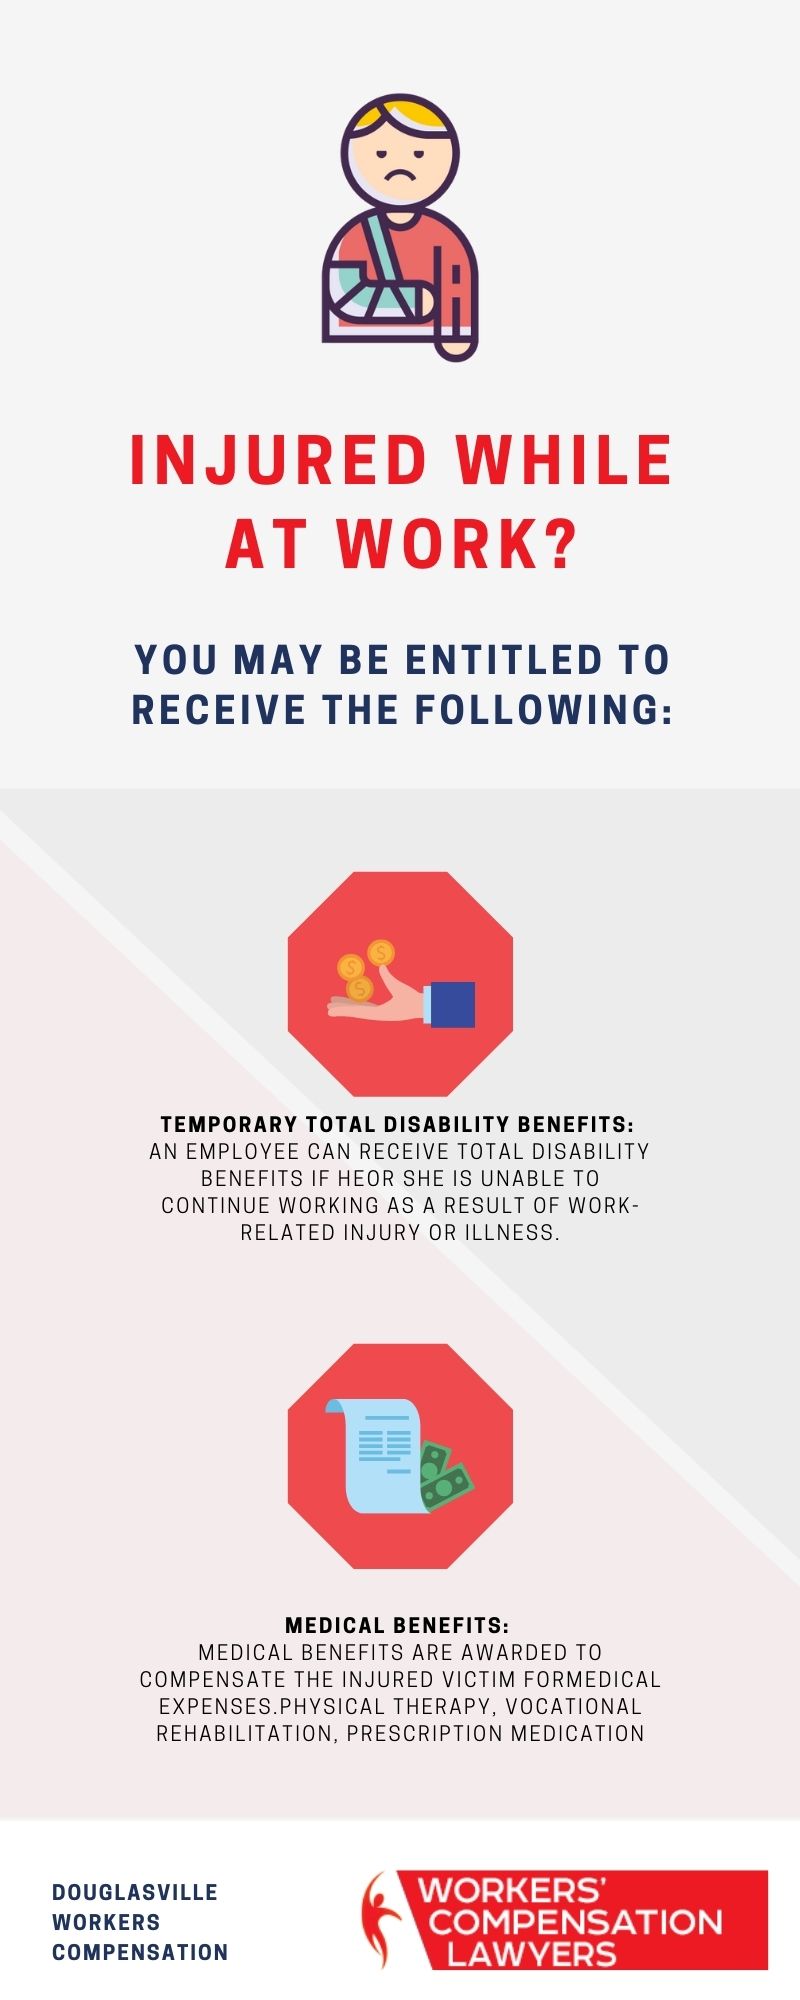 Douglasville Workers Compensation Infographic